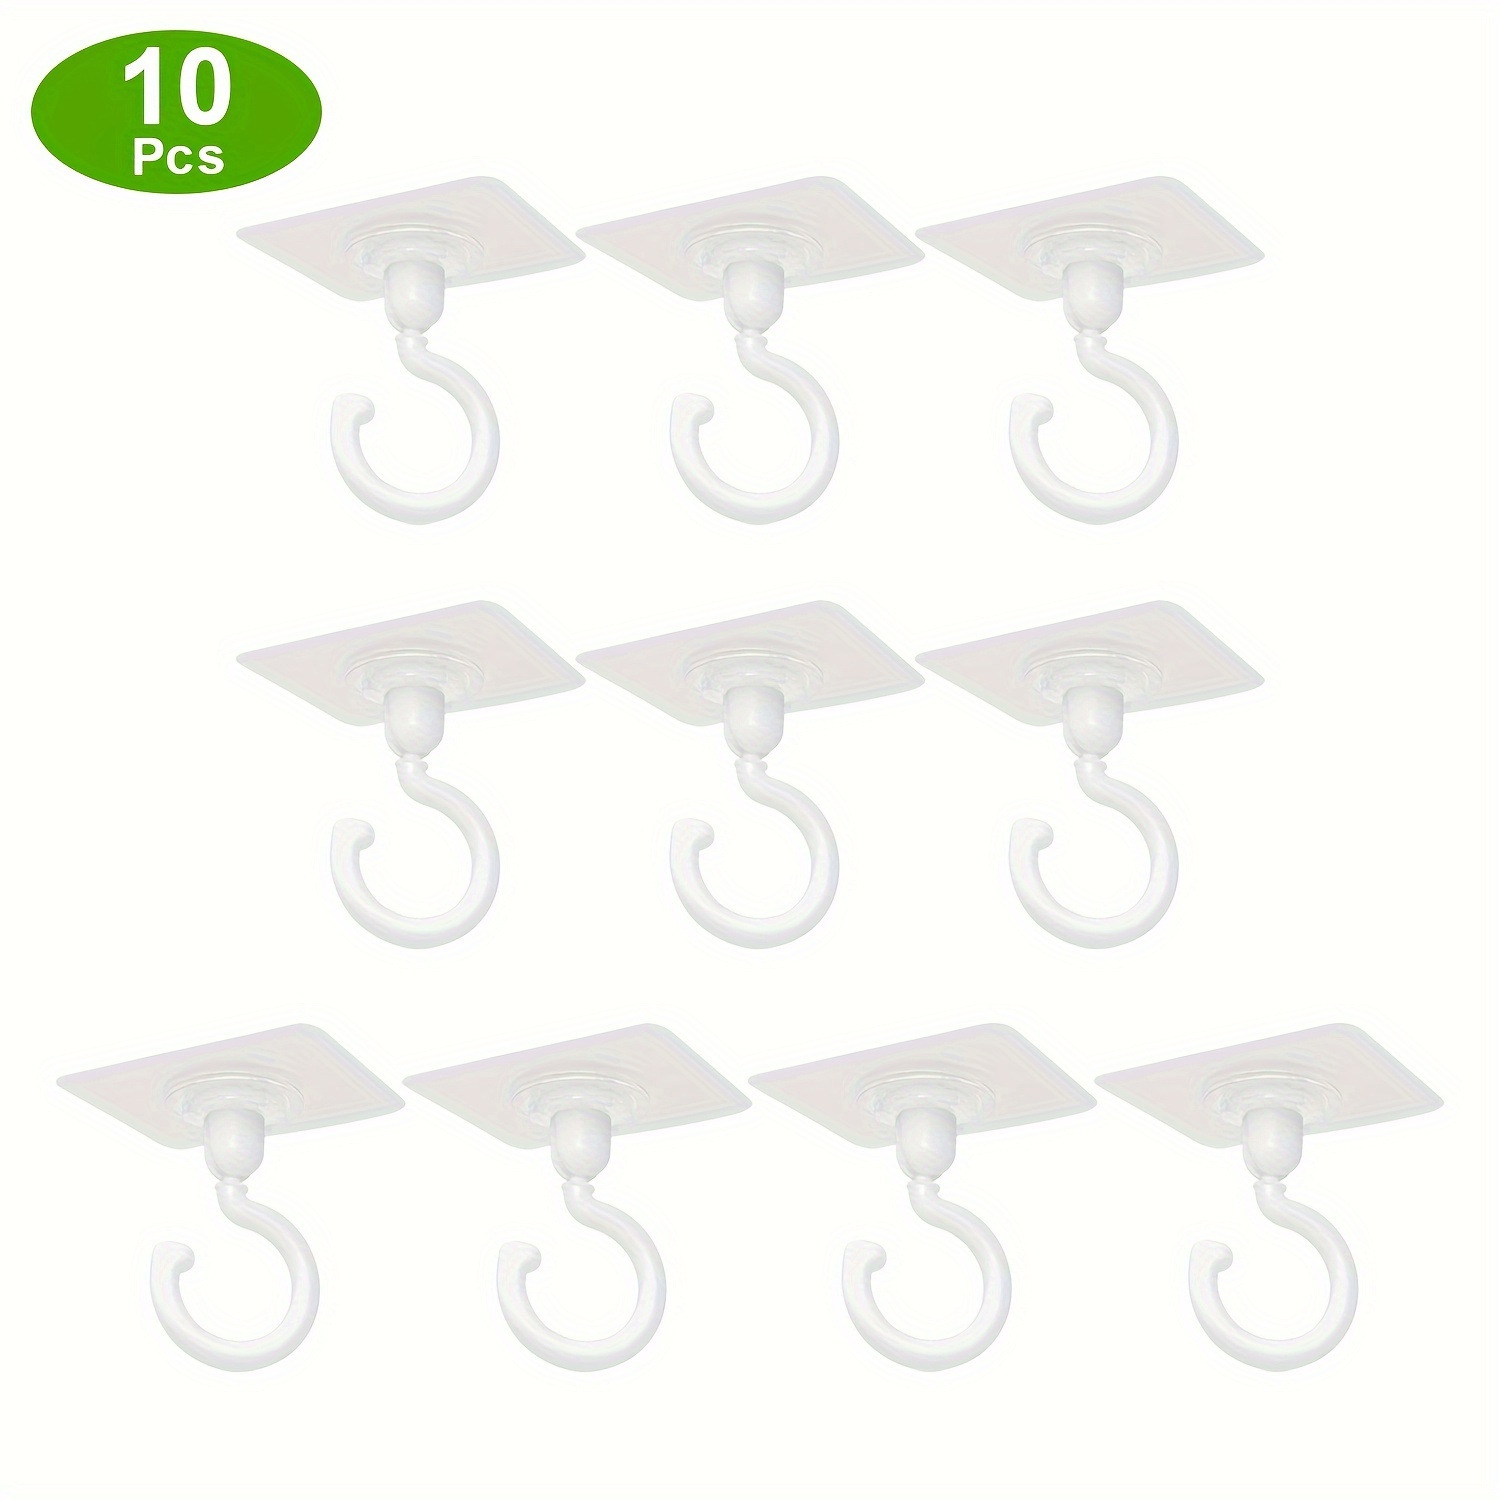 10pcs Adhesive Ceiling Hooks For Hanging Clothes Mobile Curtain 360  Rotatable Hangers Self Adhesive Ceiling Hooks No Drill Ceiling Hanging Hook  For Hanging Light Plants Lanterns Wind Chime - Business, Industry 